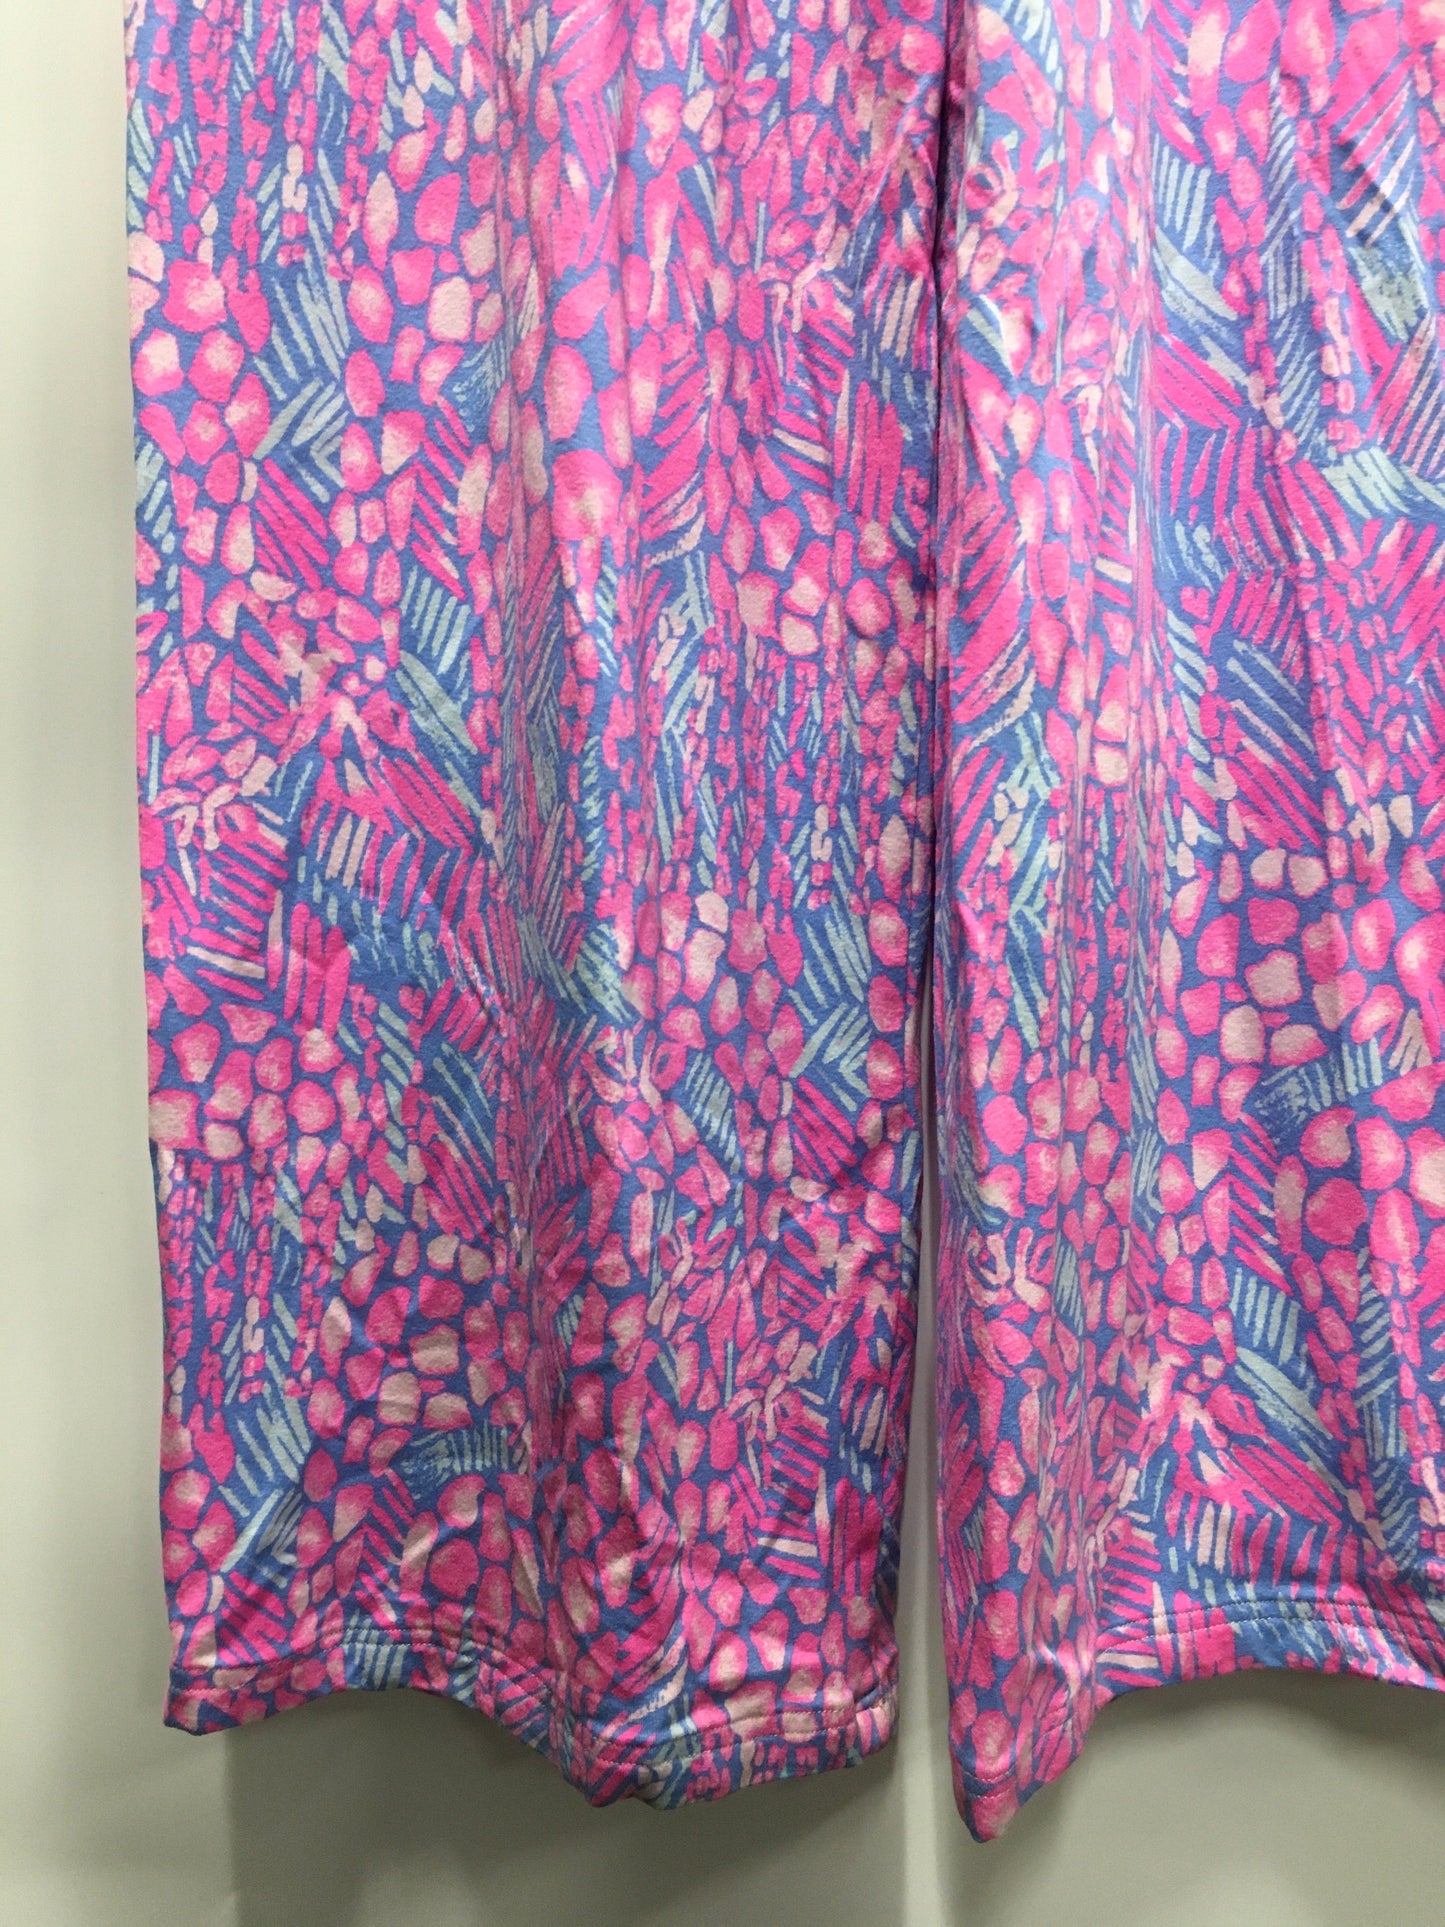 Jumpsuit By Lilly Pulitzer  Size: S